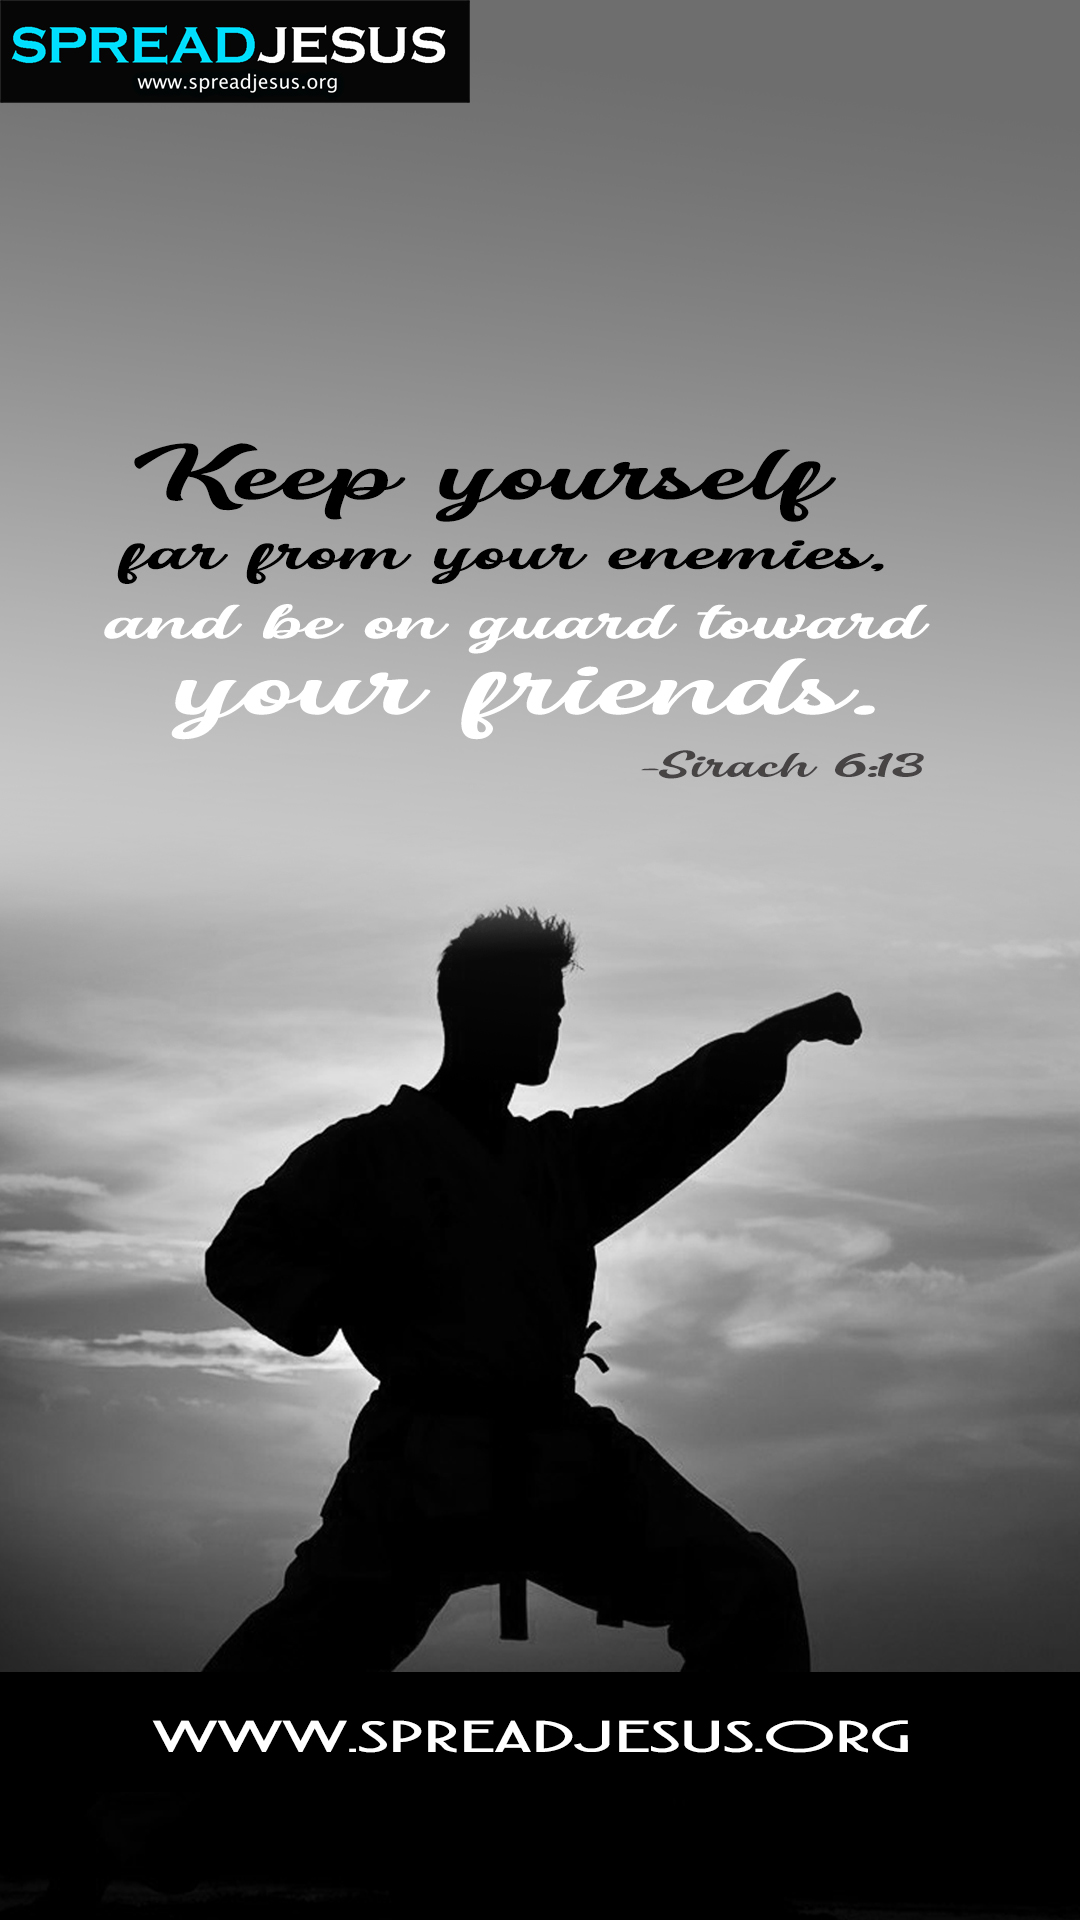 Bible Quotes Mobile Wallpaper Sirach 613 Keep yourself far from